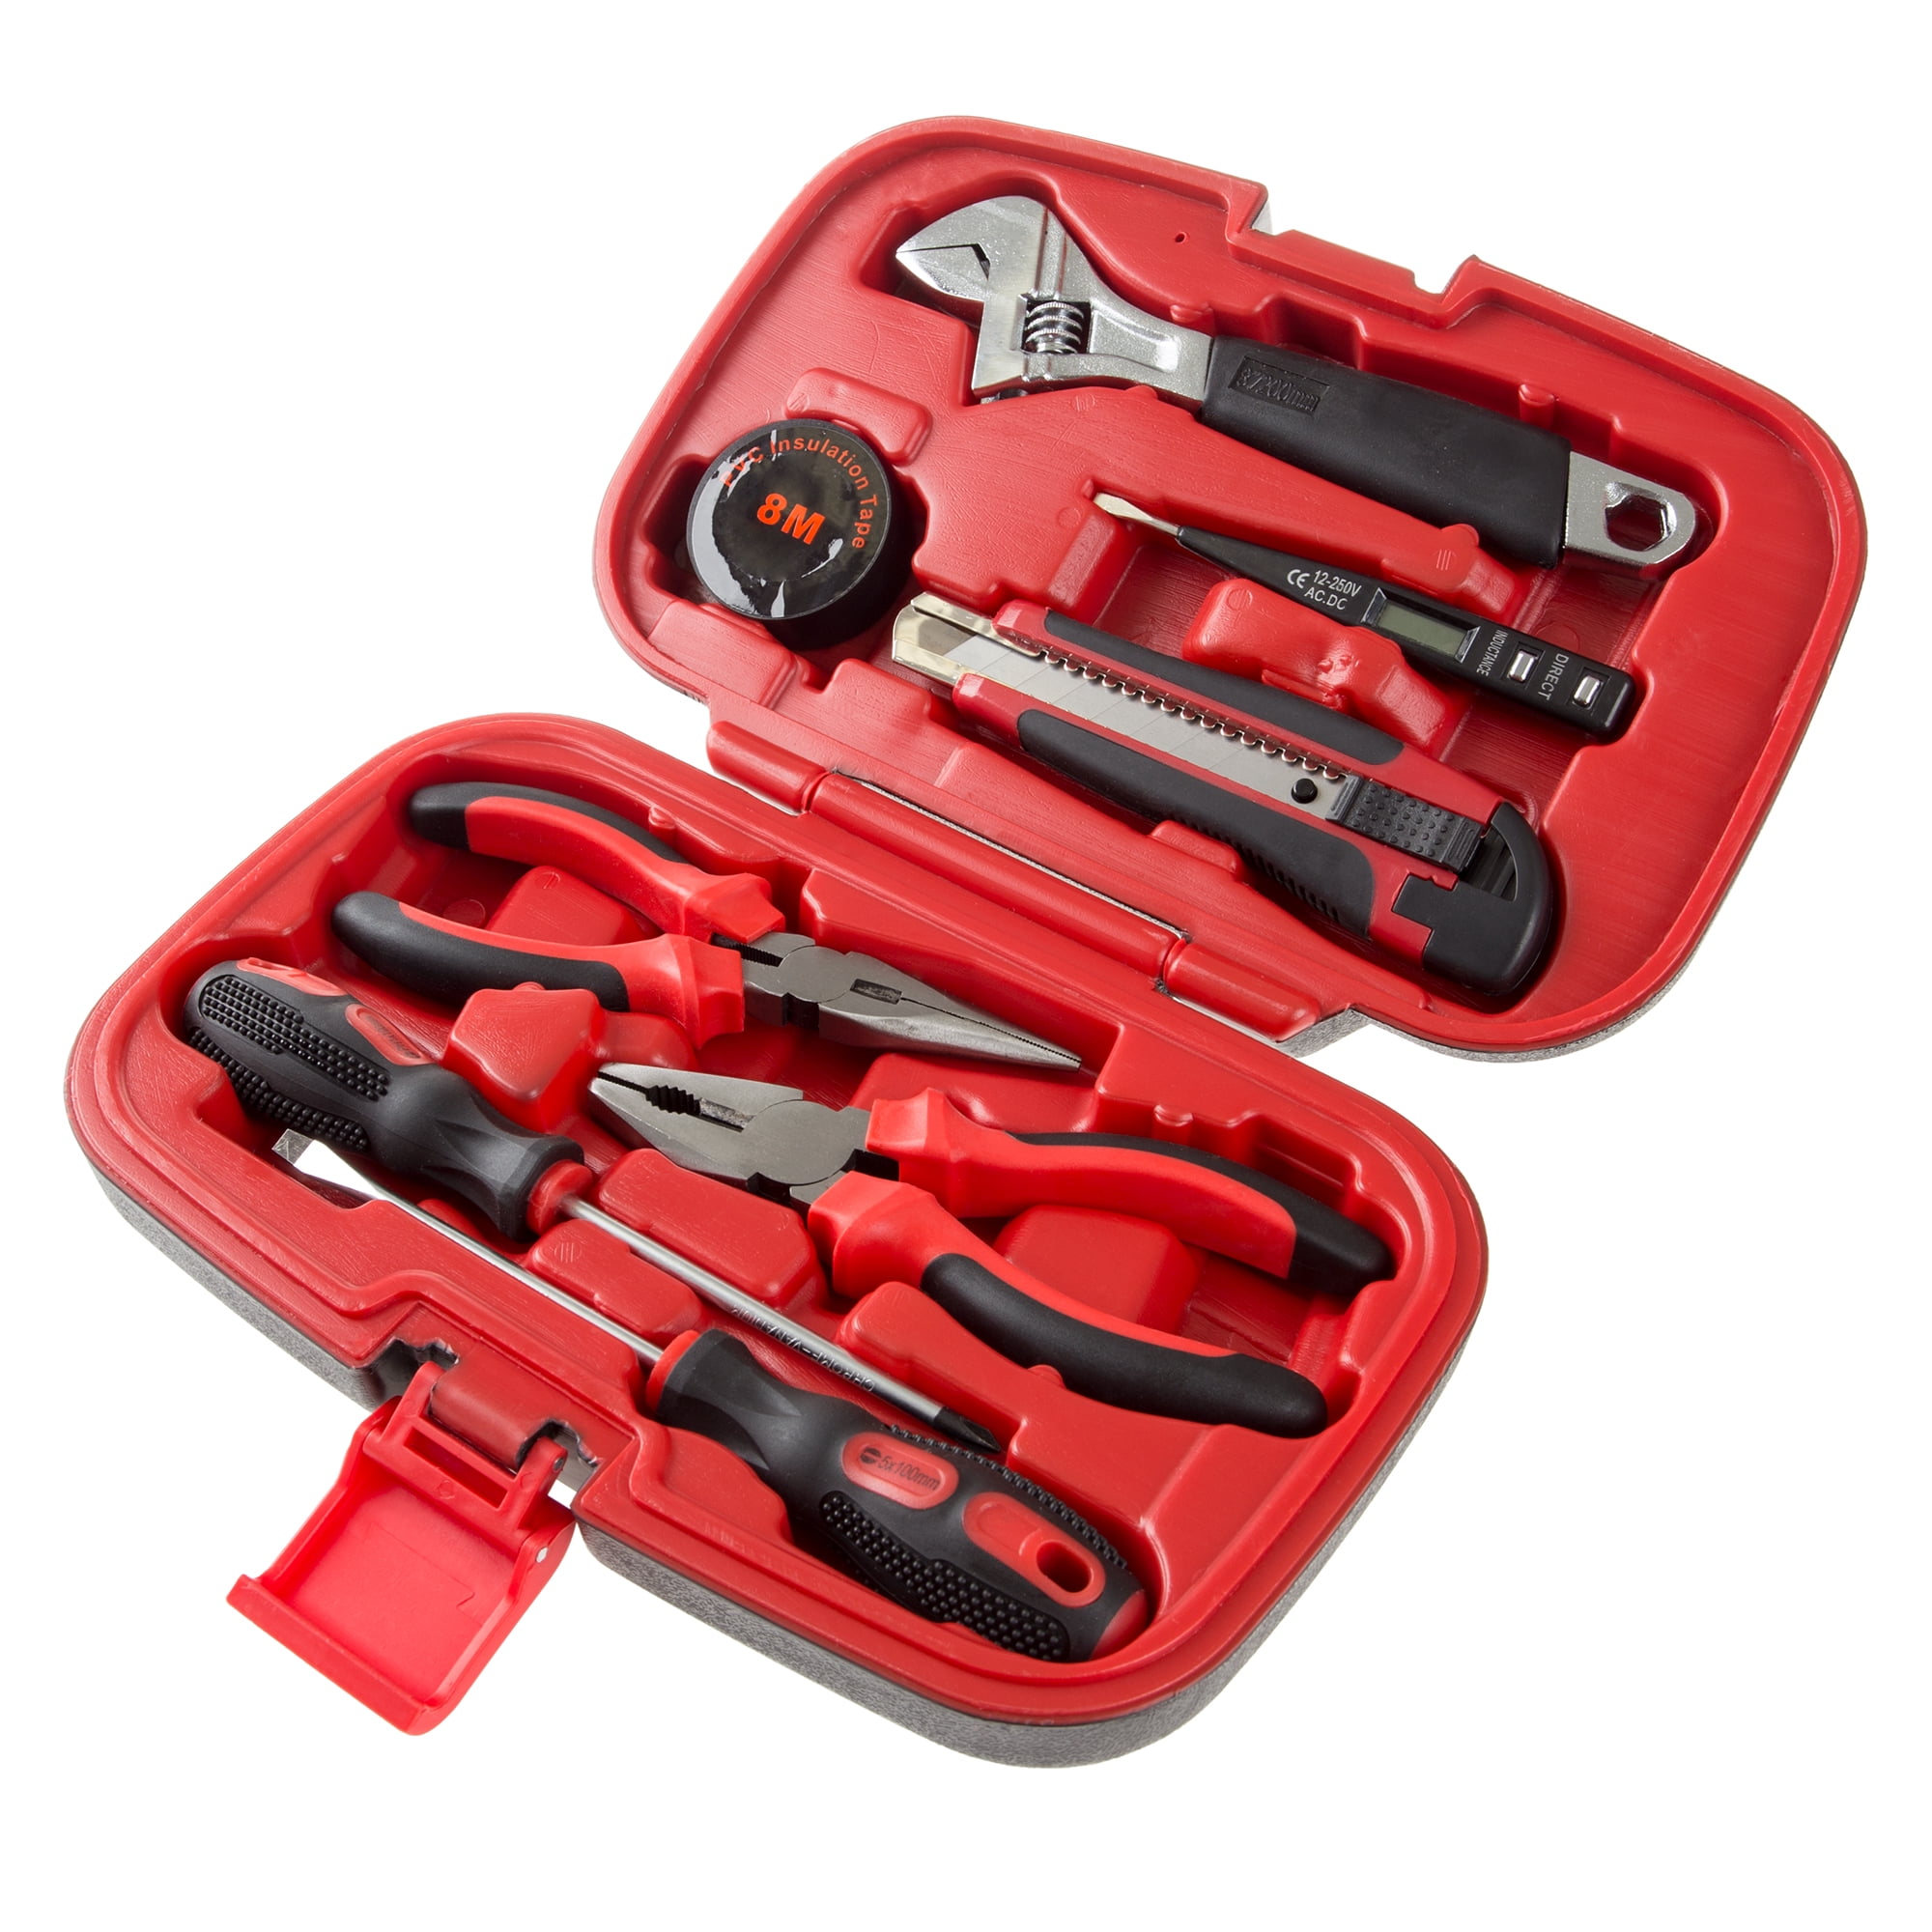 64pcs Household Hand Tool Set Home Repair Tool Kit With 14 Inch ABS  Multifunction Toolbox Household Maintenance Handtool Kit With Screwdriver  Set Hamm